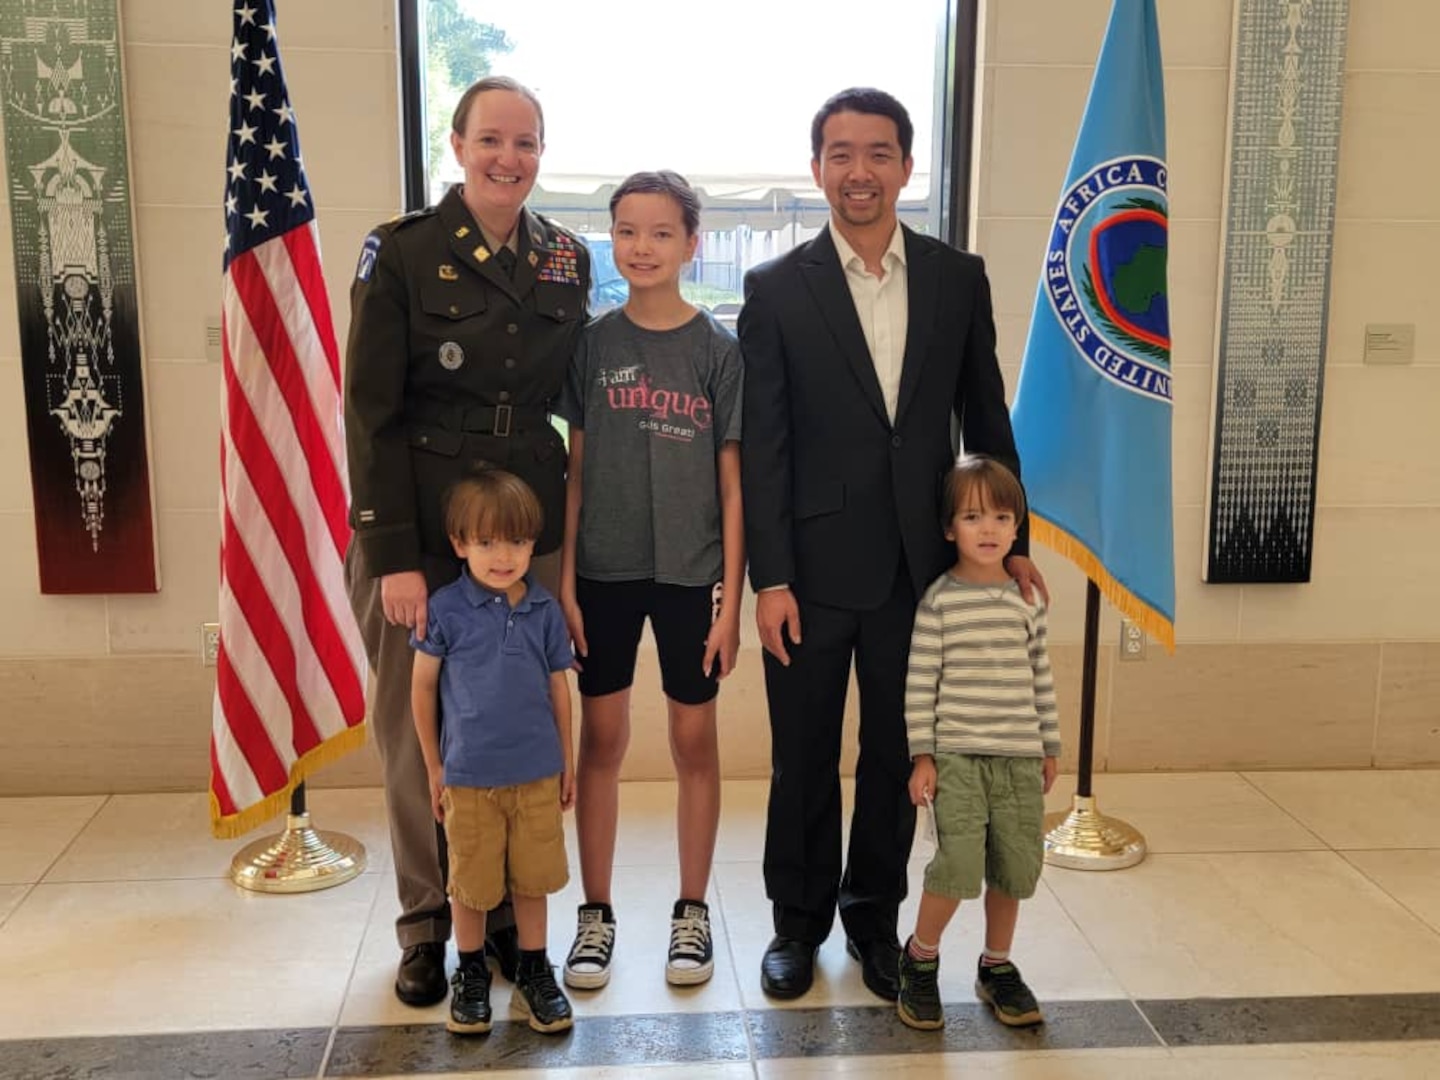 Nebraska Army National Guard Maj. Jessica Pan poses with her husband and three children after her promotion ceremony to the rank of major, Feb. 22, 2023, at the U.S. Embassy in Kigali, Rwanda.